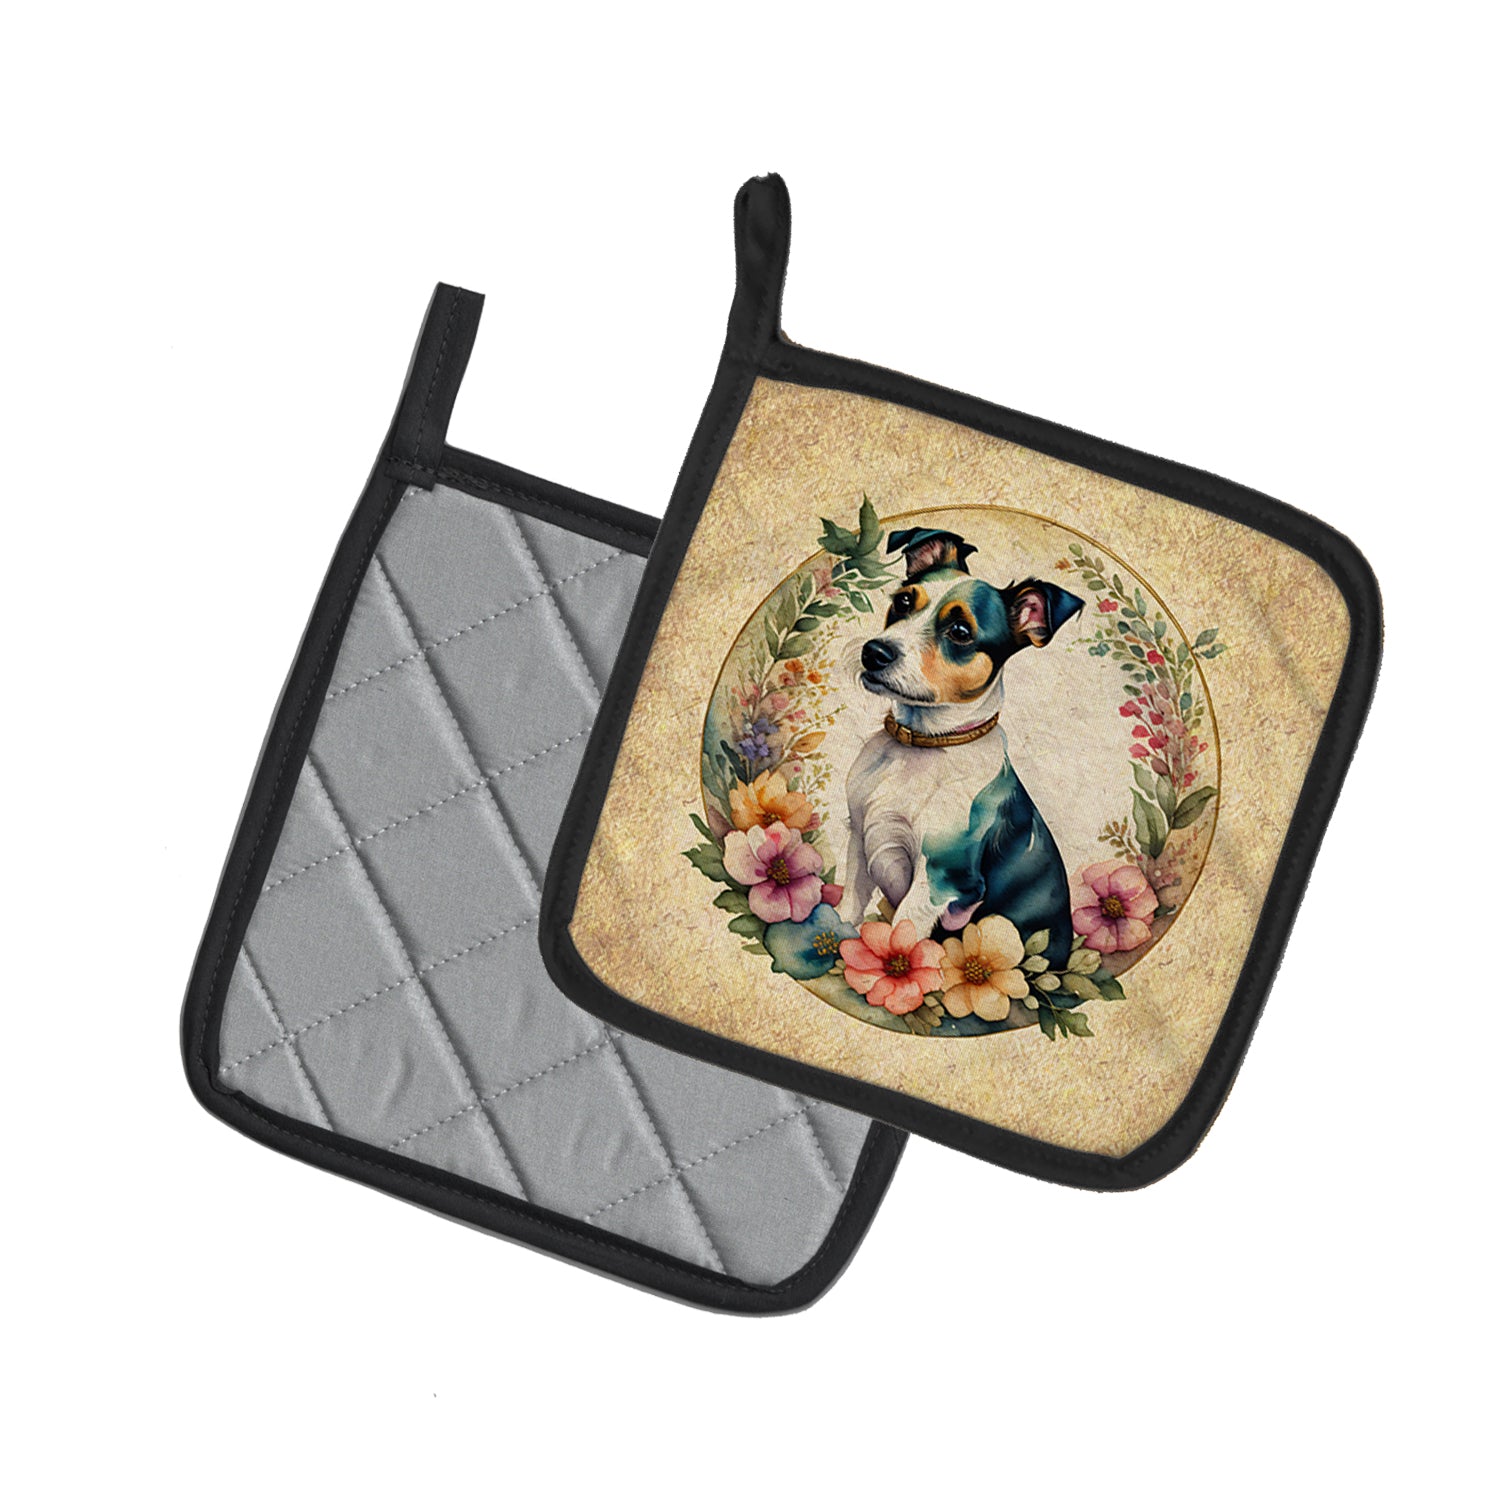 Buy this Jack Russell Terrier and Flowers Pair of Pot Holders